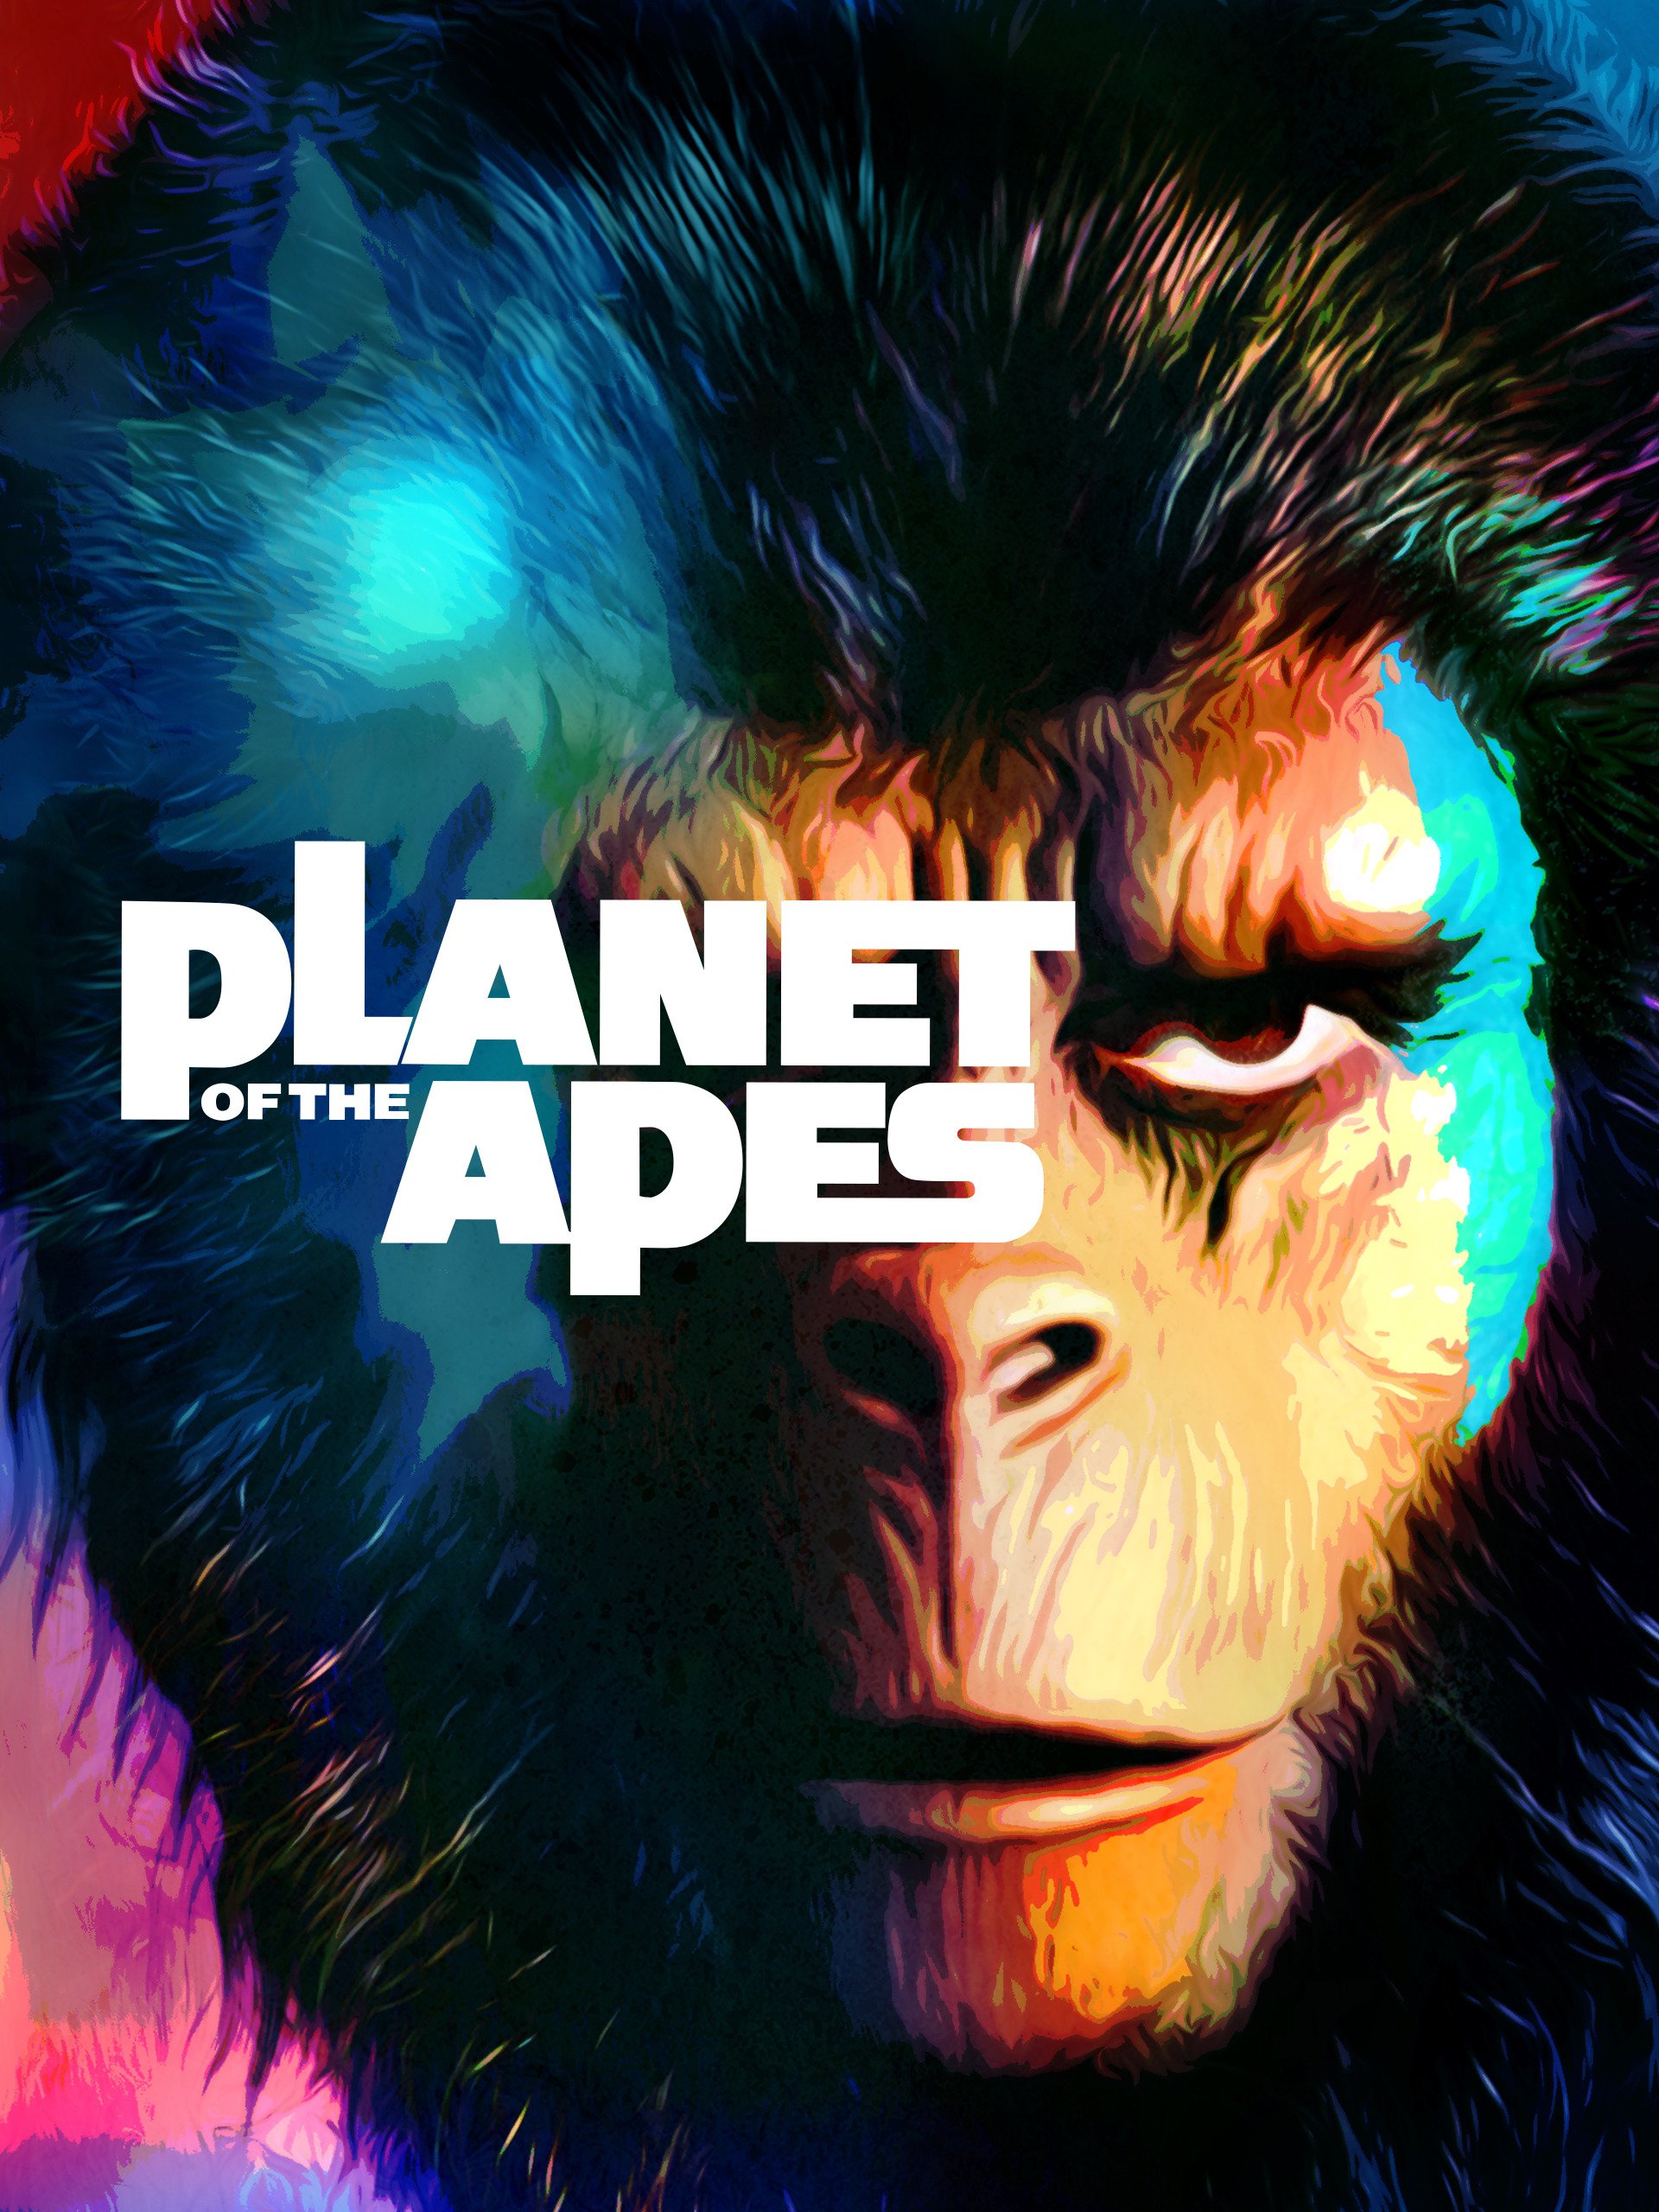 Planet of the Apes, starring Charleton Heston, Roddy McDowell